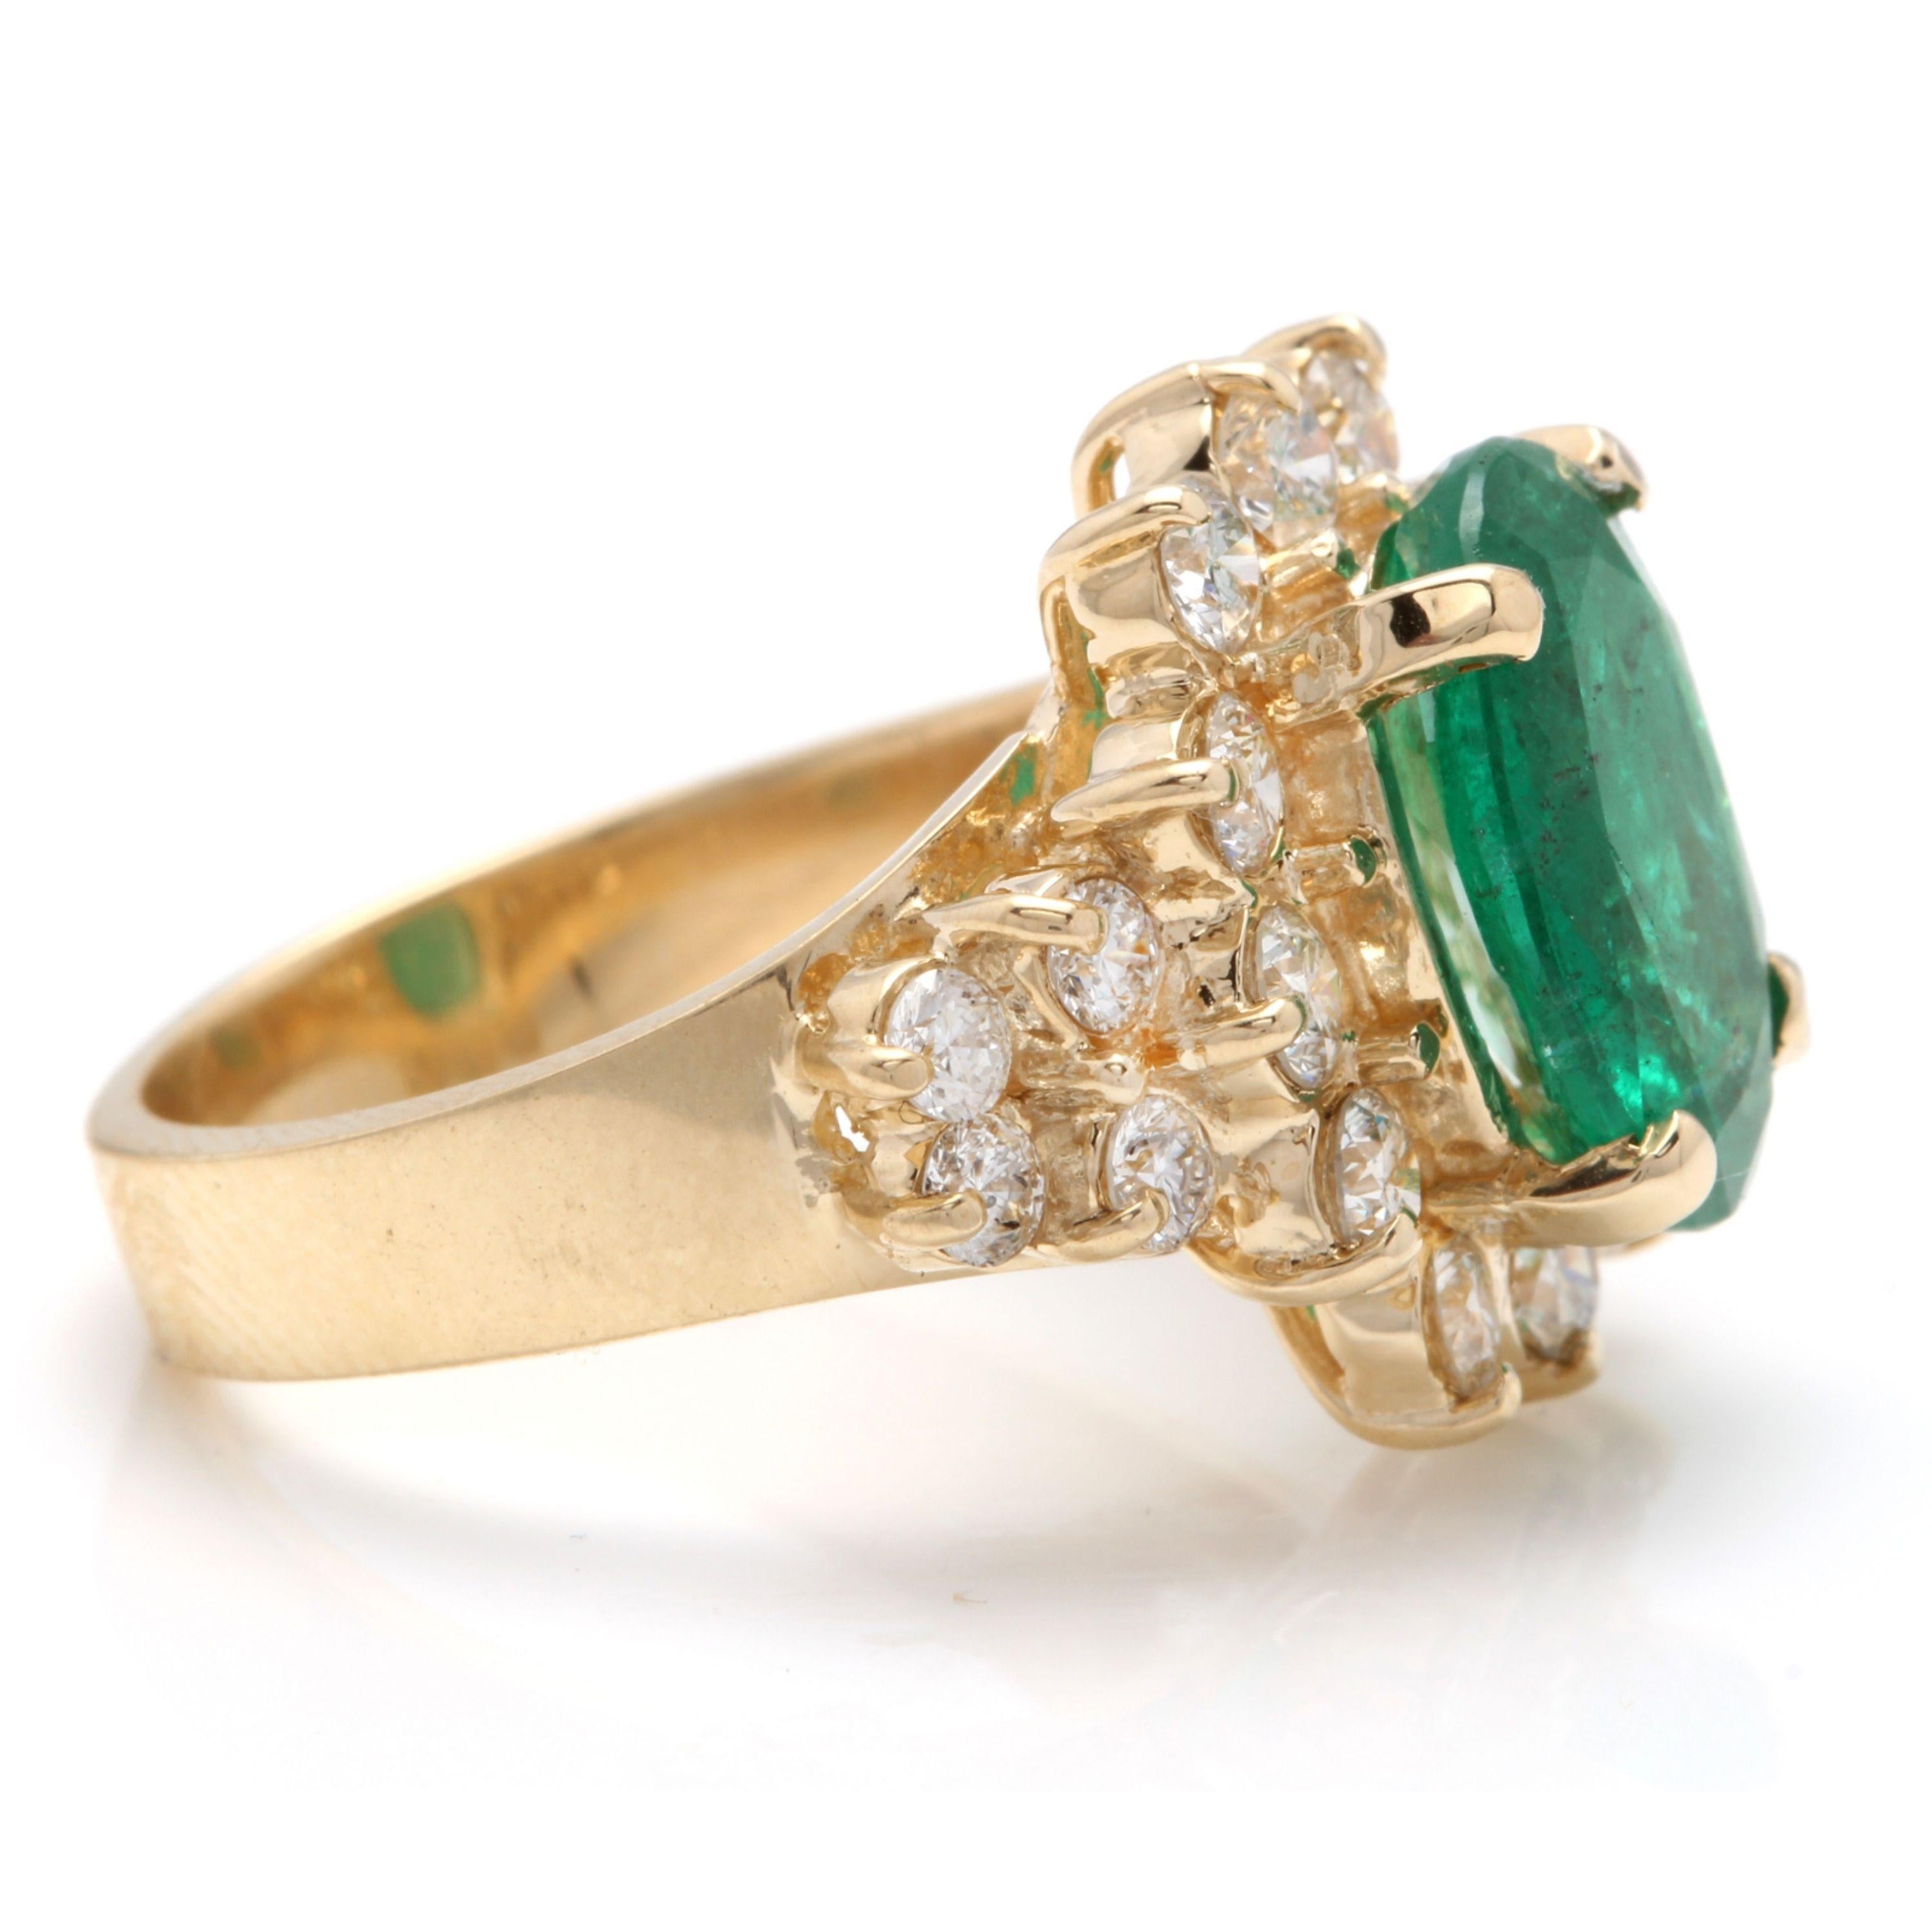 Emerald Cut 5.70 Carat Natural Emerald and Diamond 14 Karat Solid Yellow Gold Ring For Sale